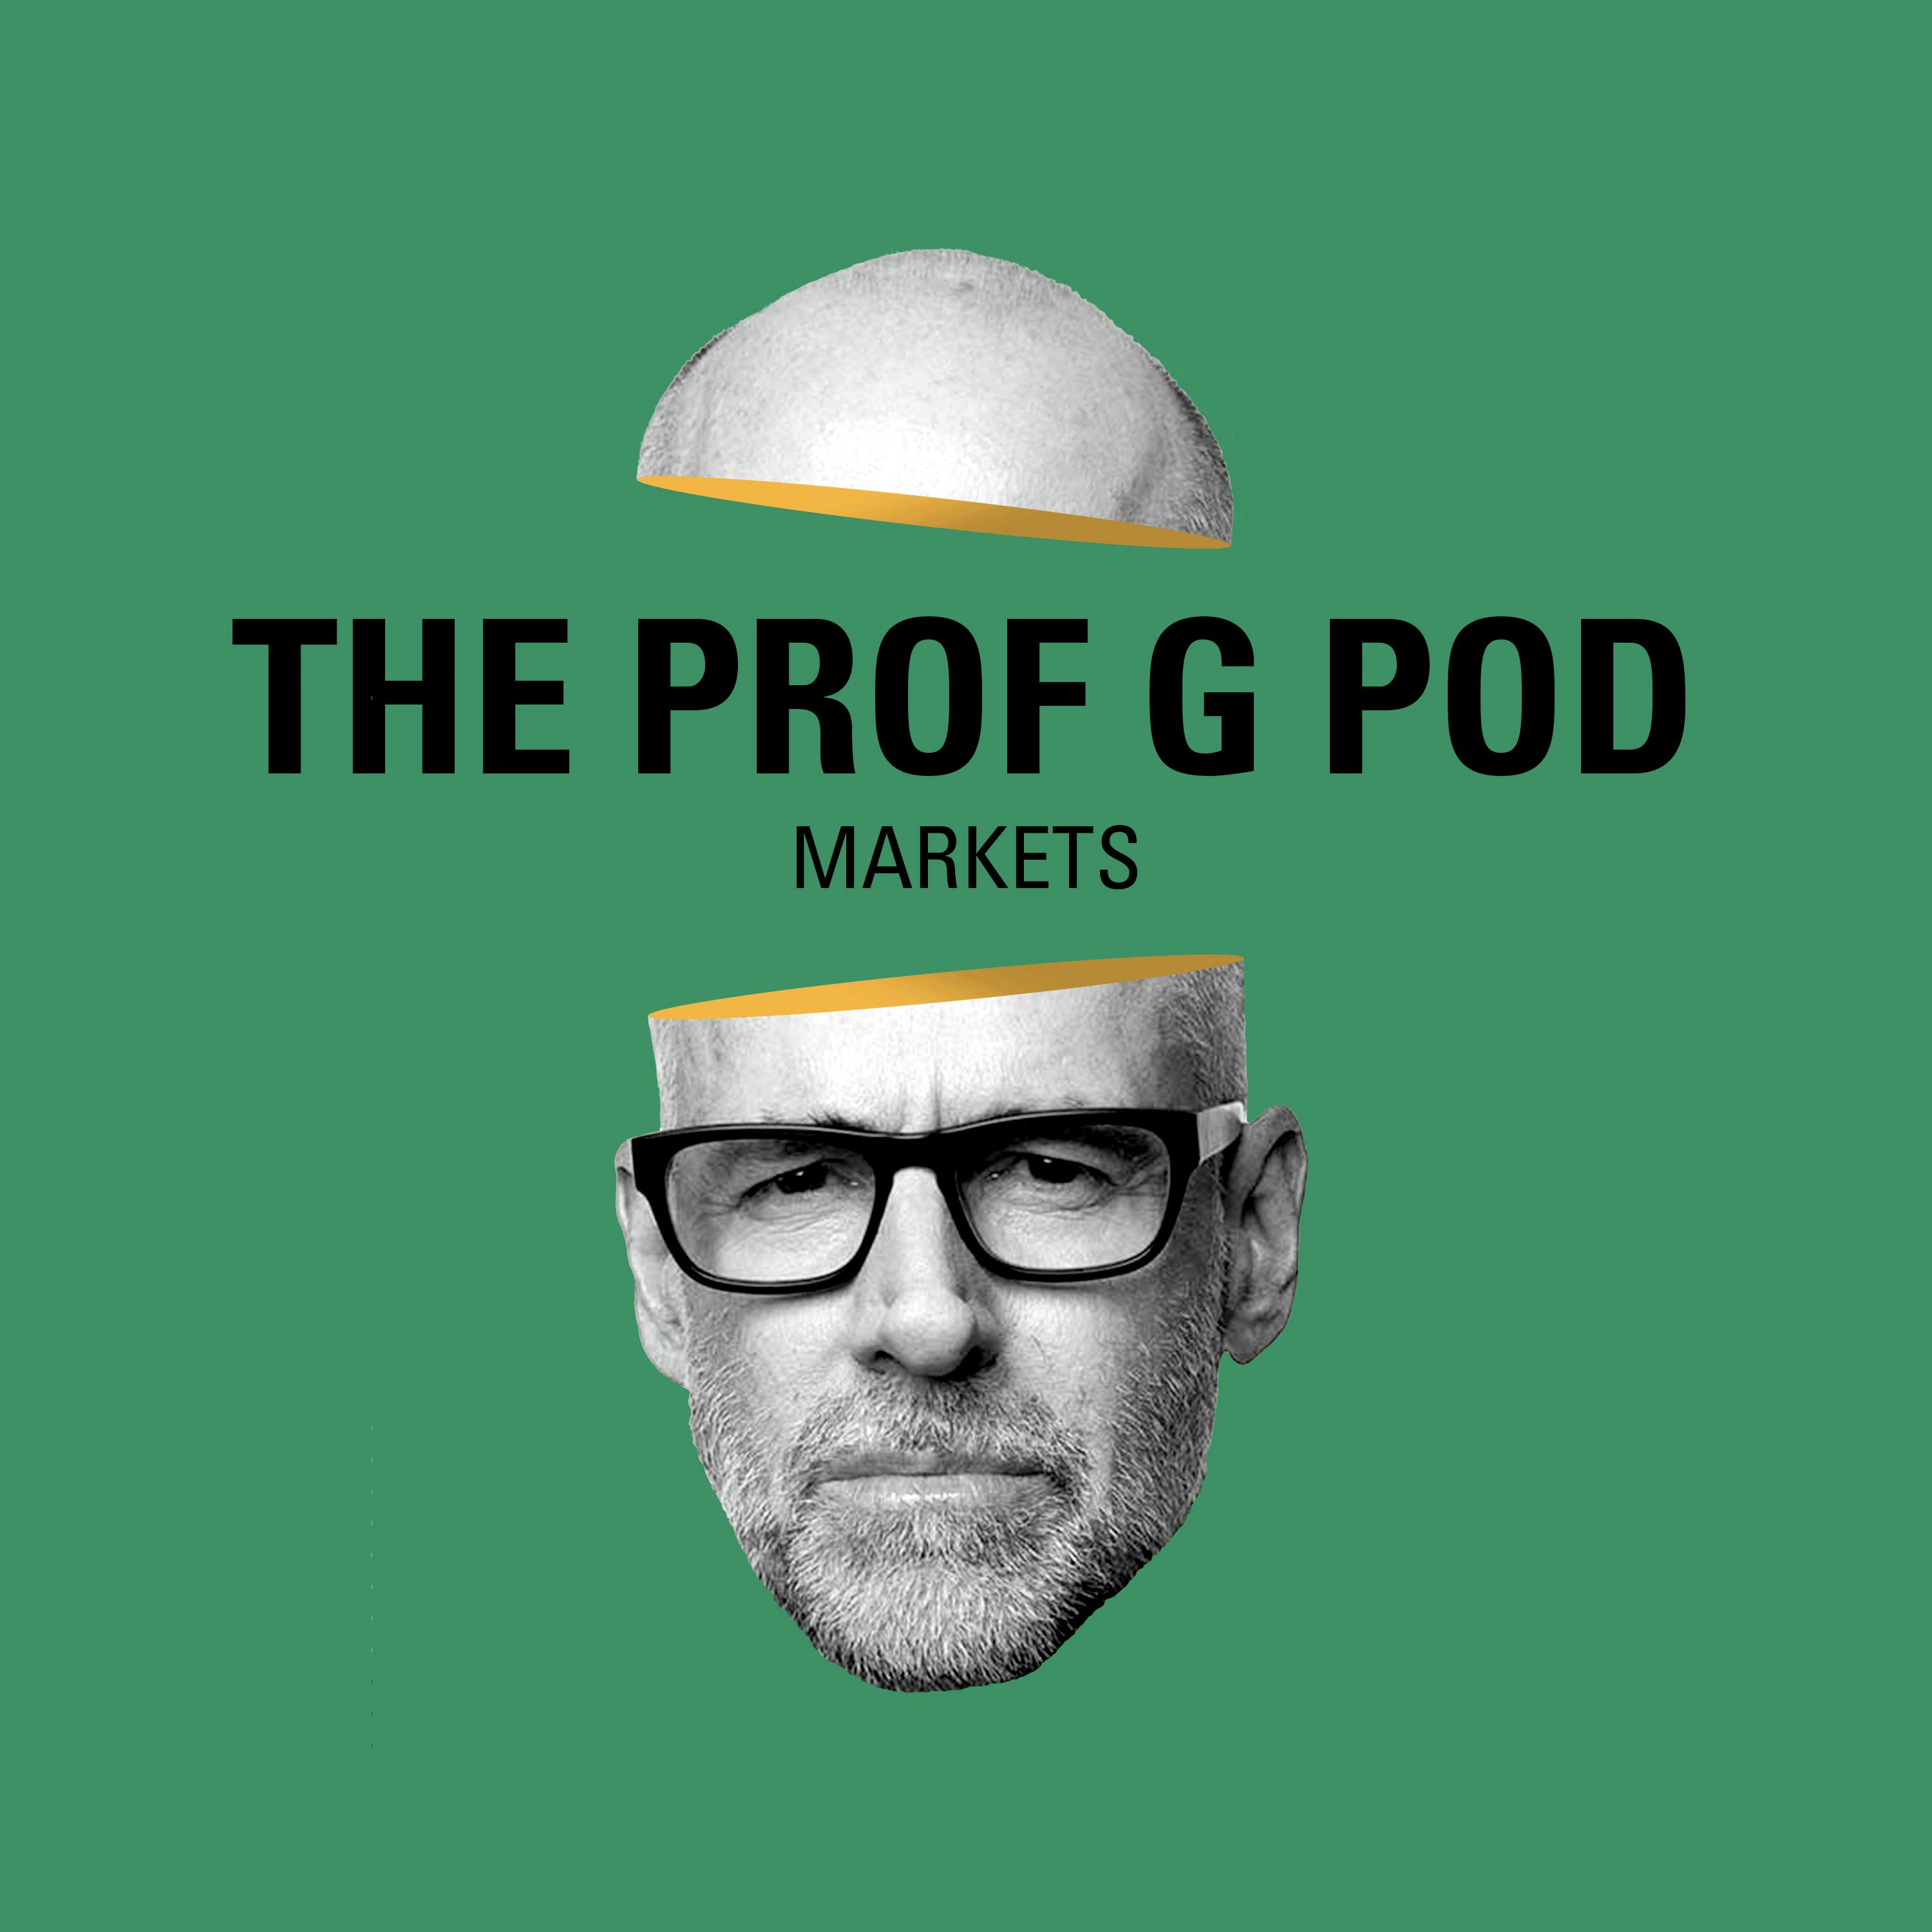 Prof G Markets: The Demise of Chamath’s SPACs, Citrix’s Debt Deal, and Adobe’s Figma Acquisition by Vox Media Podcast Network